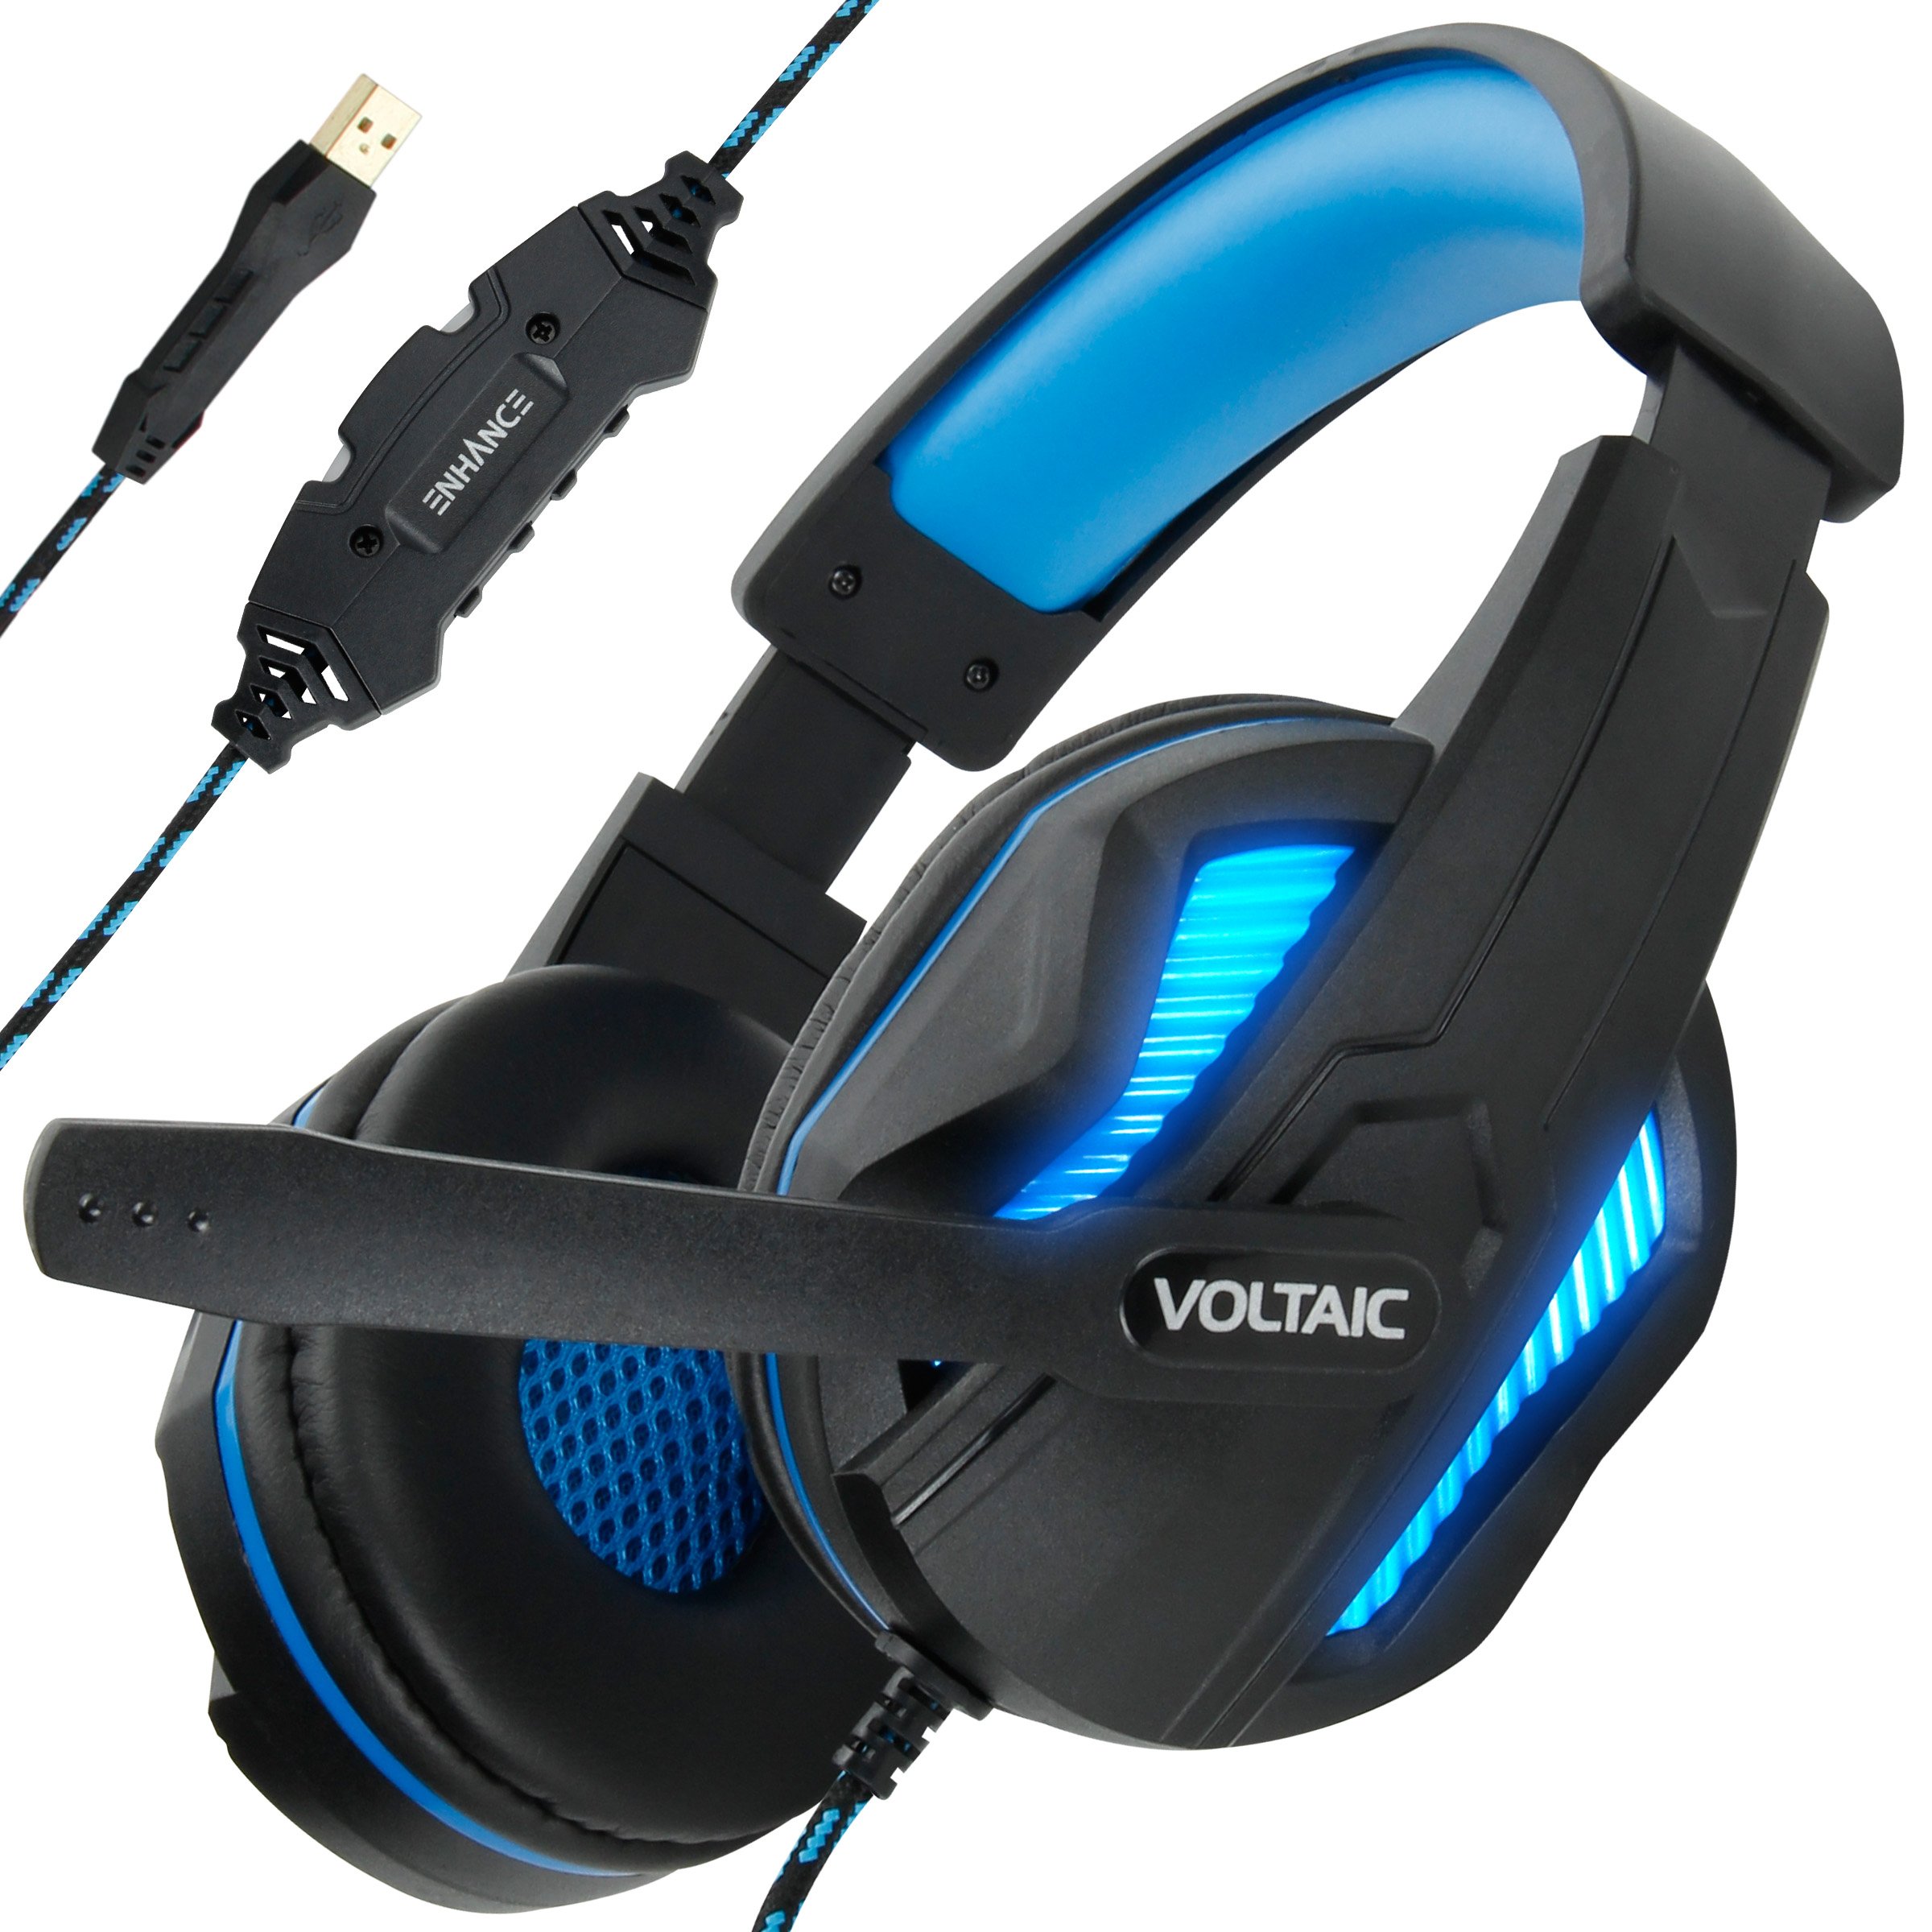 ENHANCE PC Gaming Headset for PS4 & Computer with 7.1 Surround Sound - Voltaic PRO Esports Computer Headphones with Microphone, LED Light, in-Line Controls - Great for PUBG, Fortnite & More